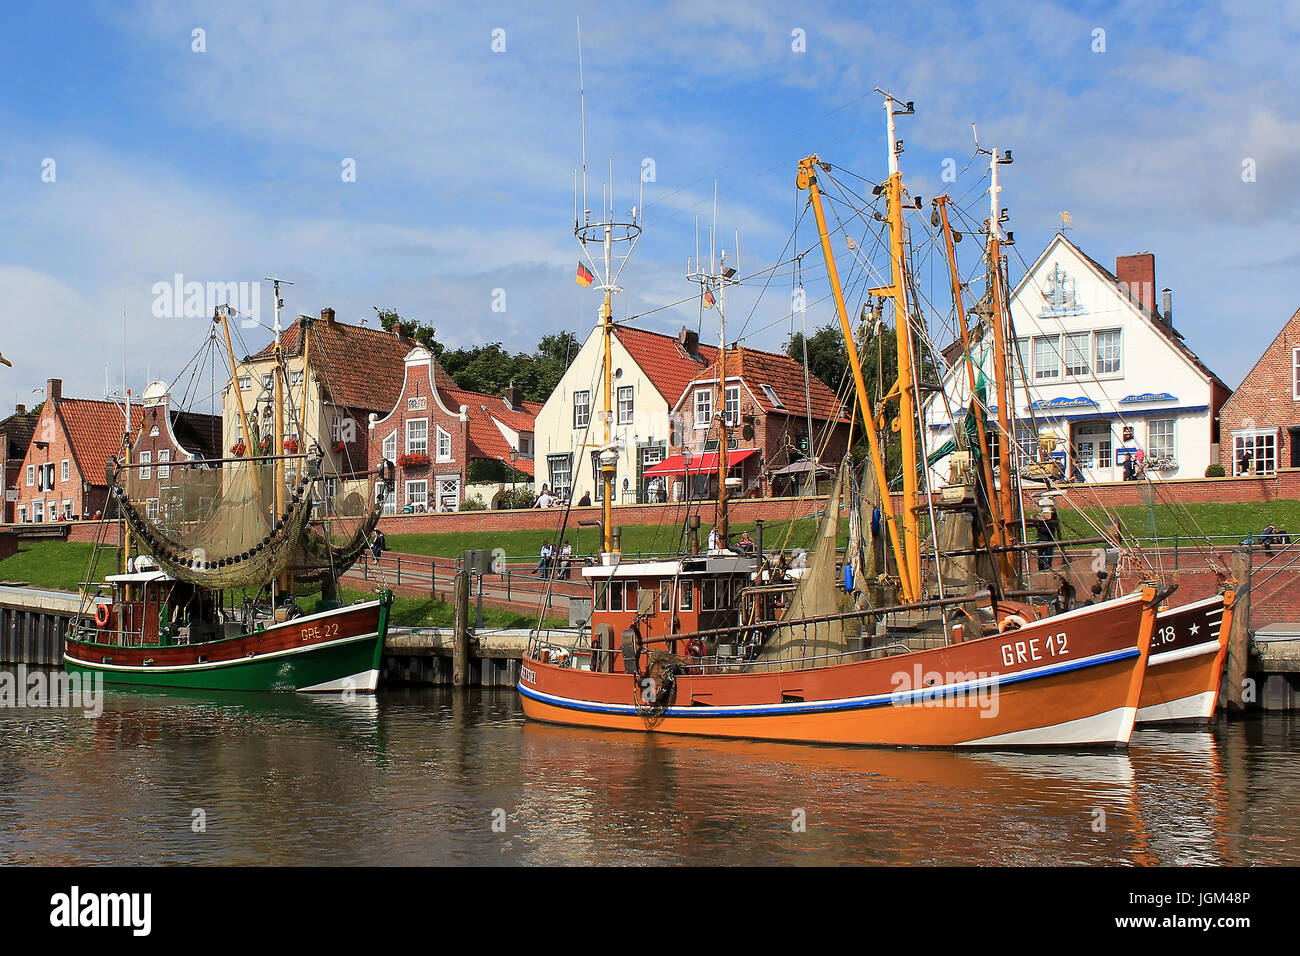 The Federal Republic of Germany, Lower Saxony, the North Sea, North Sea coast, East Friesland, to Krummhoern, Greetsiel, floodgate harbour, harbour, f Stock Photo